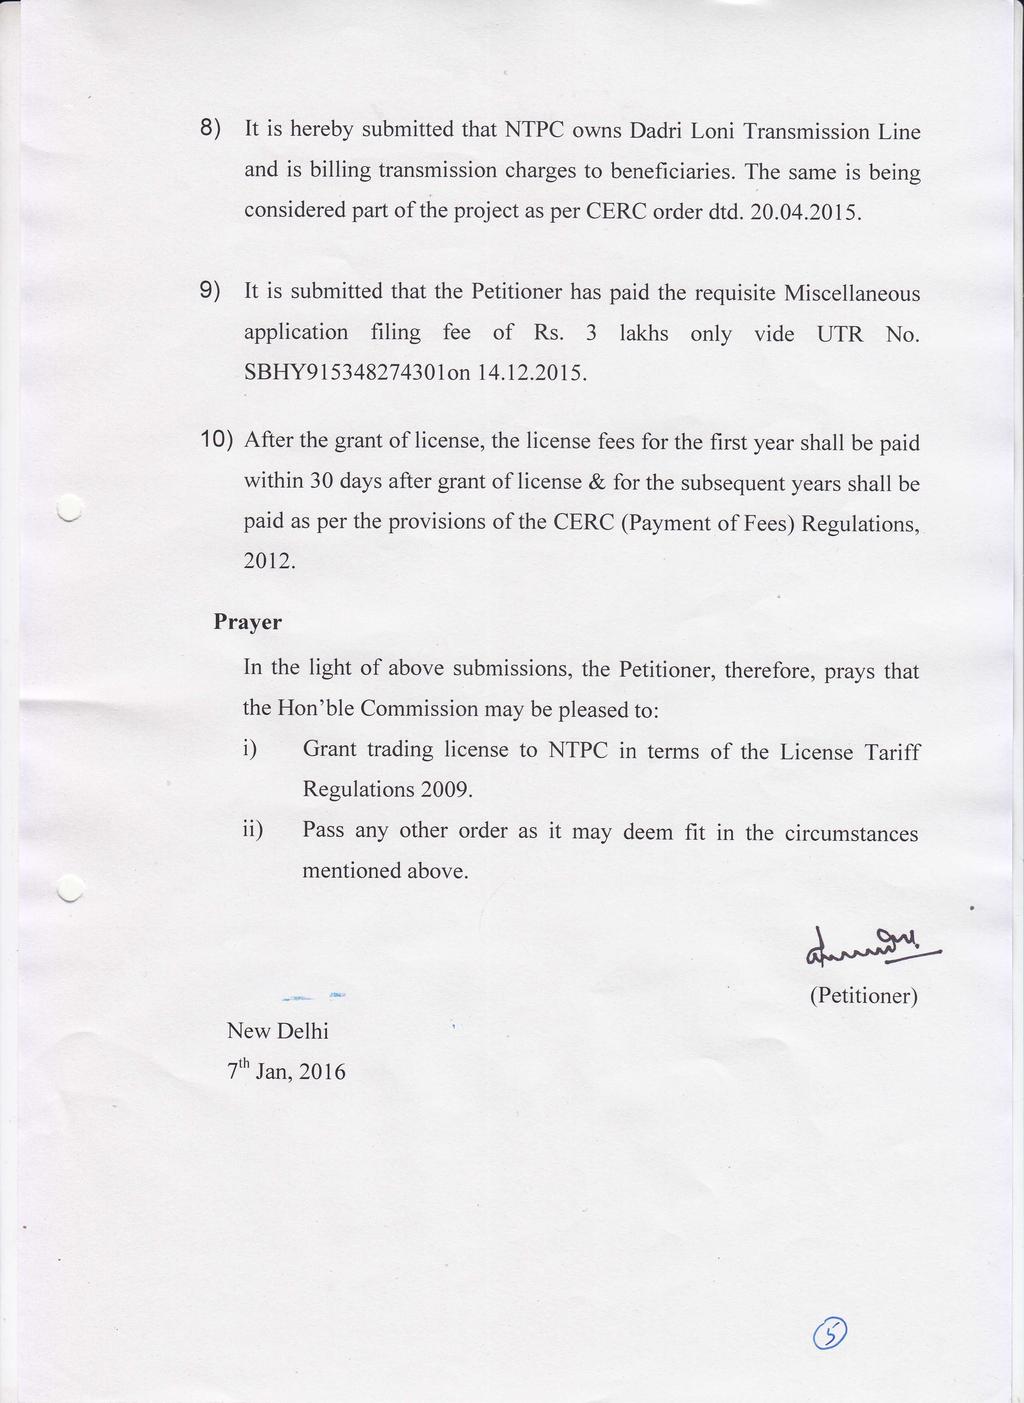 8) It is hereby submitted that NTPC owns Dadri Loni Transmission Line and is billing transmission charges to beneficiaries. The same is being considered part of the project as per CERC order dtd.2o.